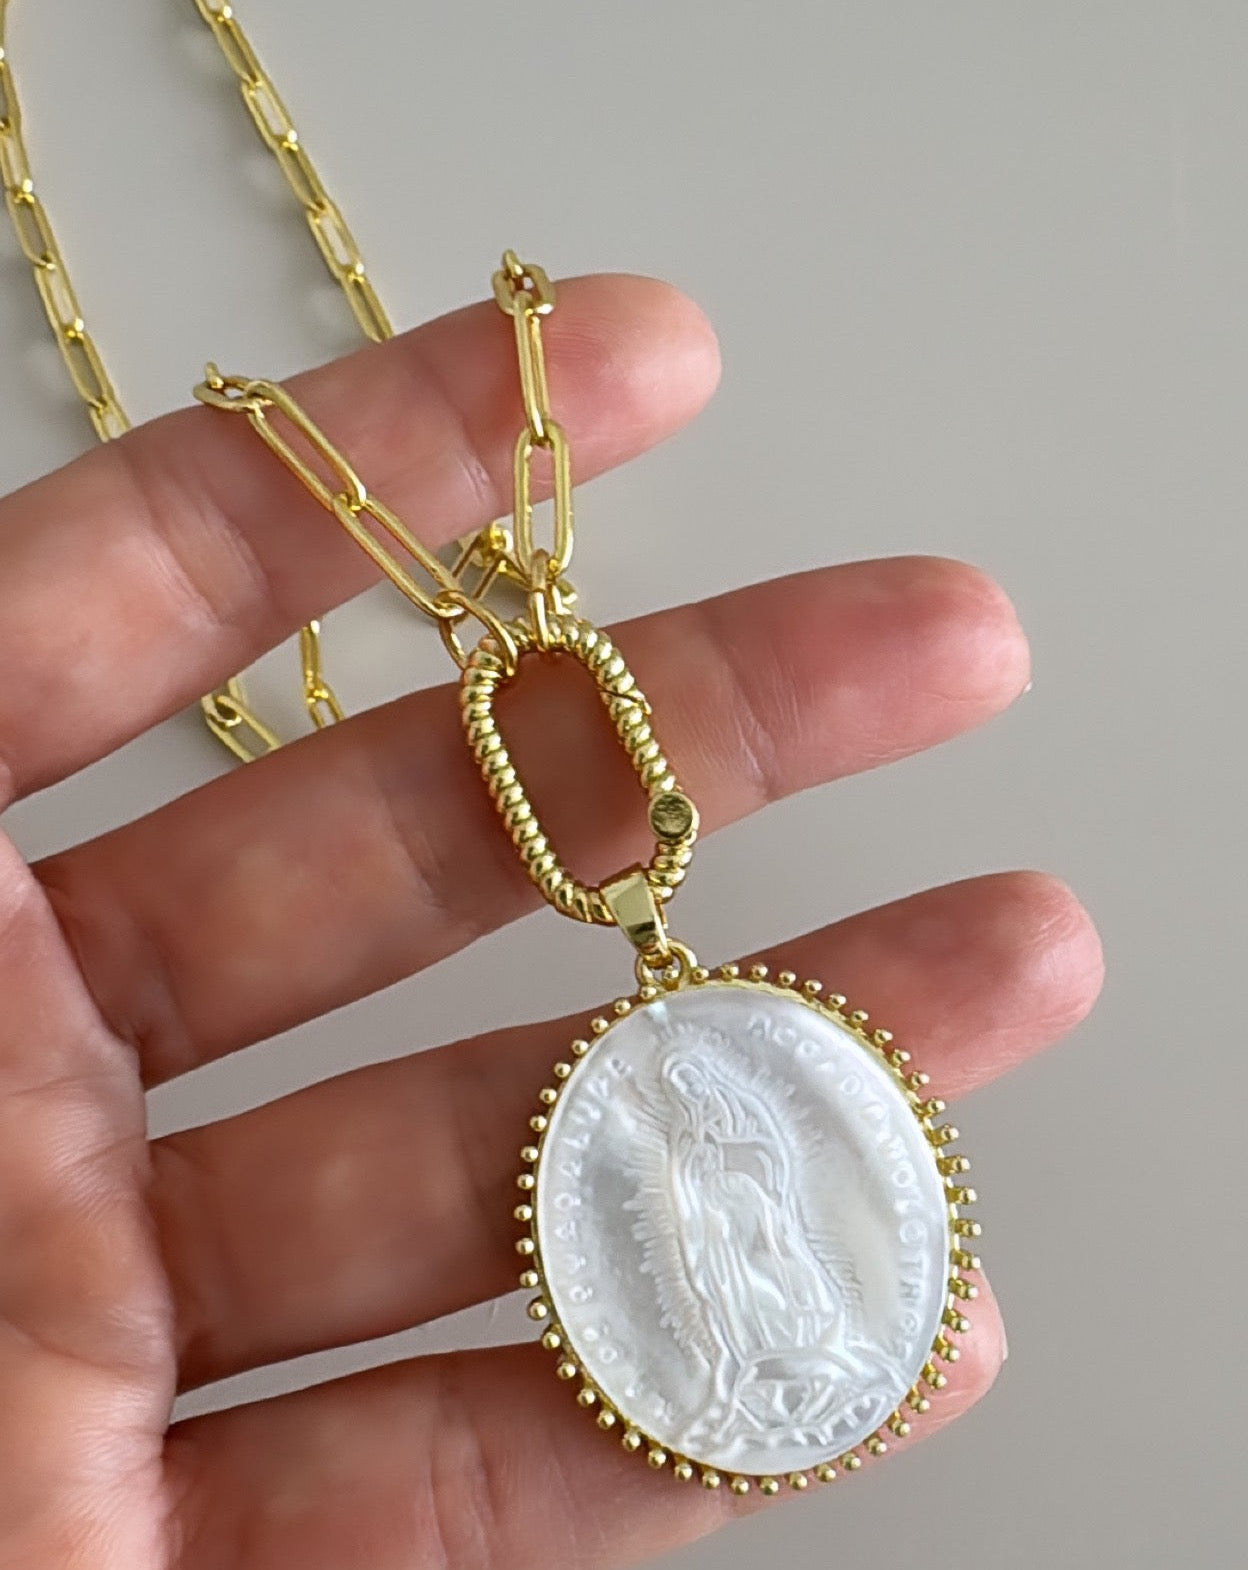 Guadalupe Virgin Necklace